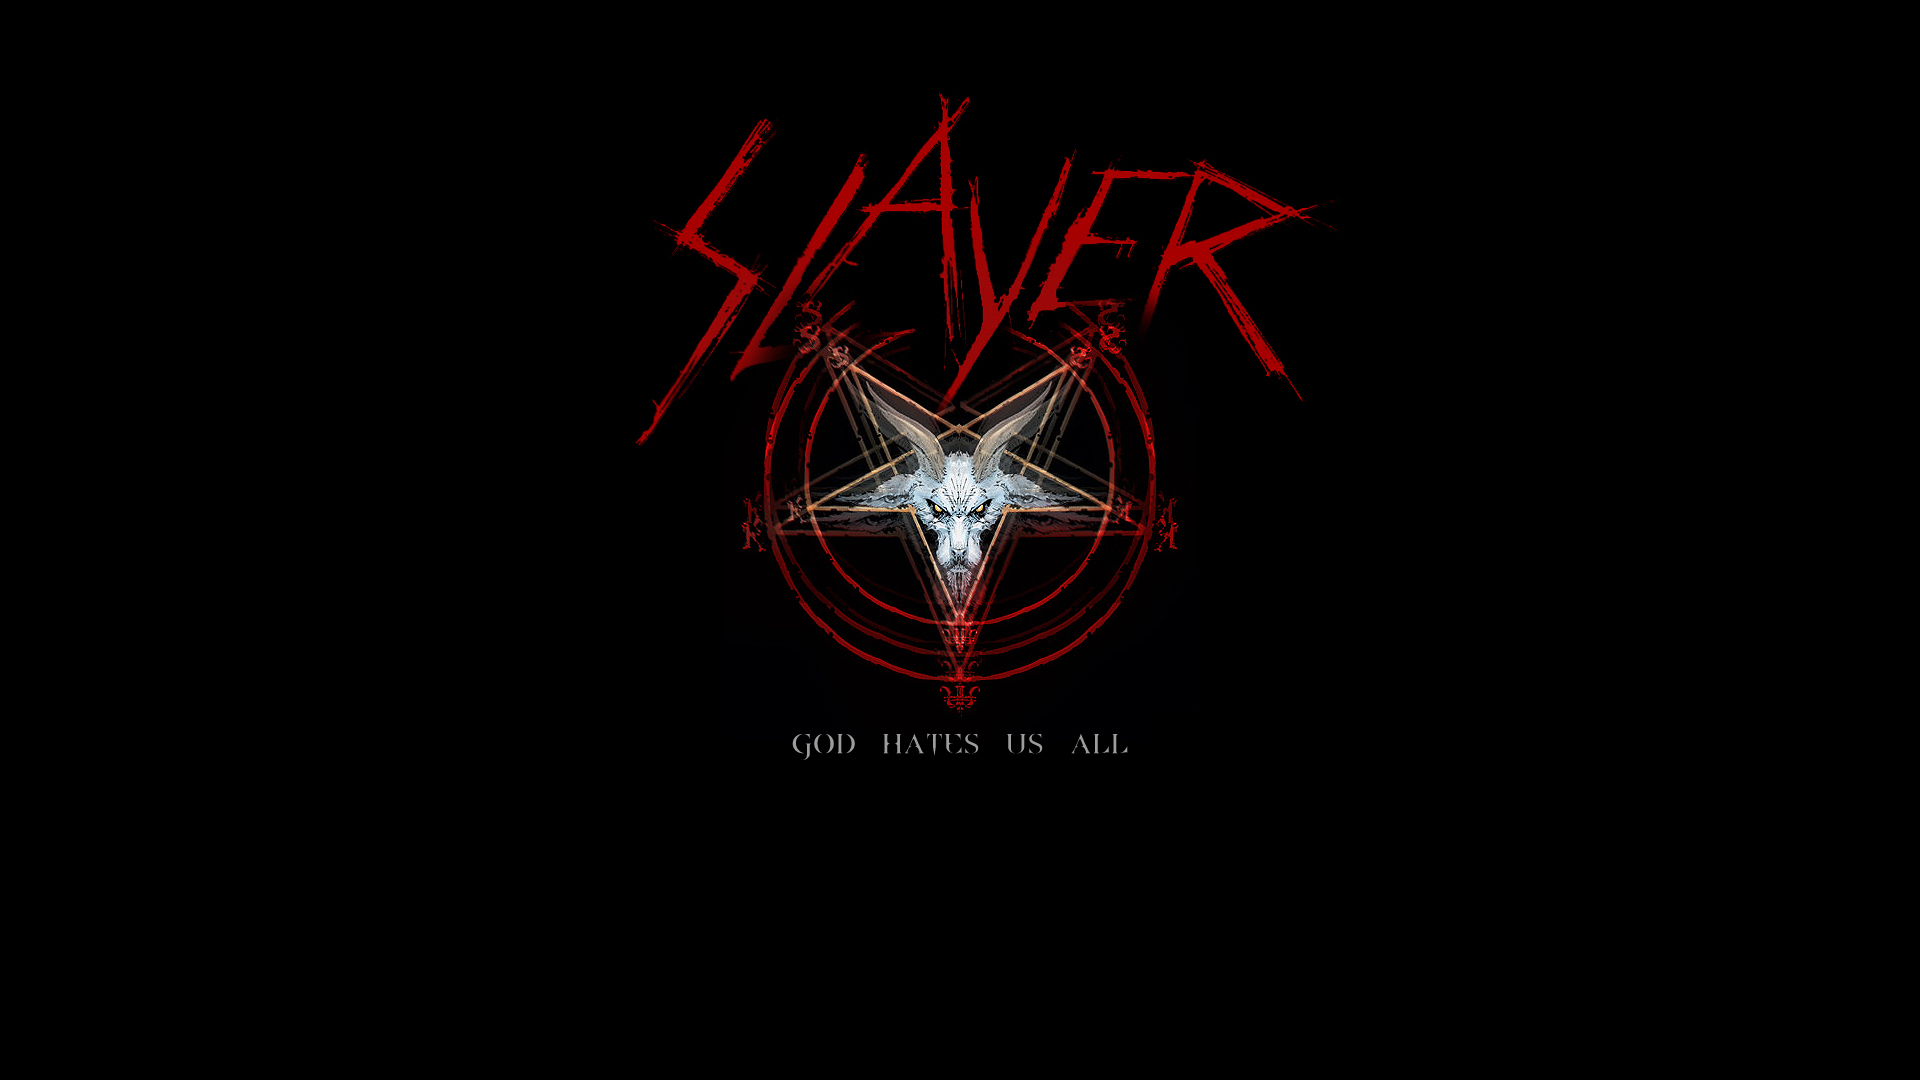 20+ Slayer HD Wallpapers and Backgrounds